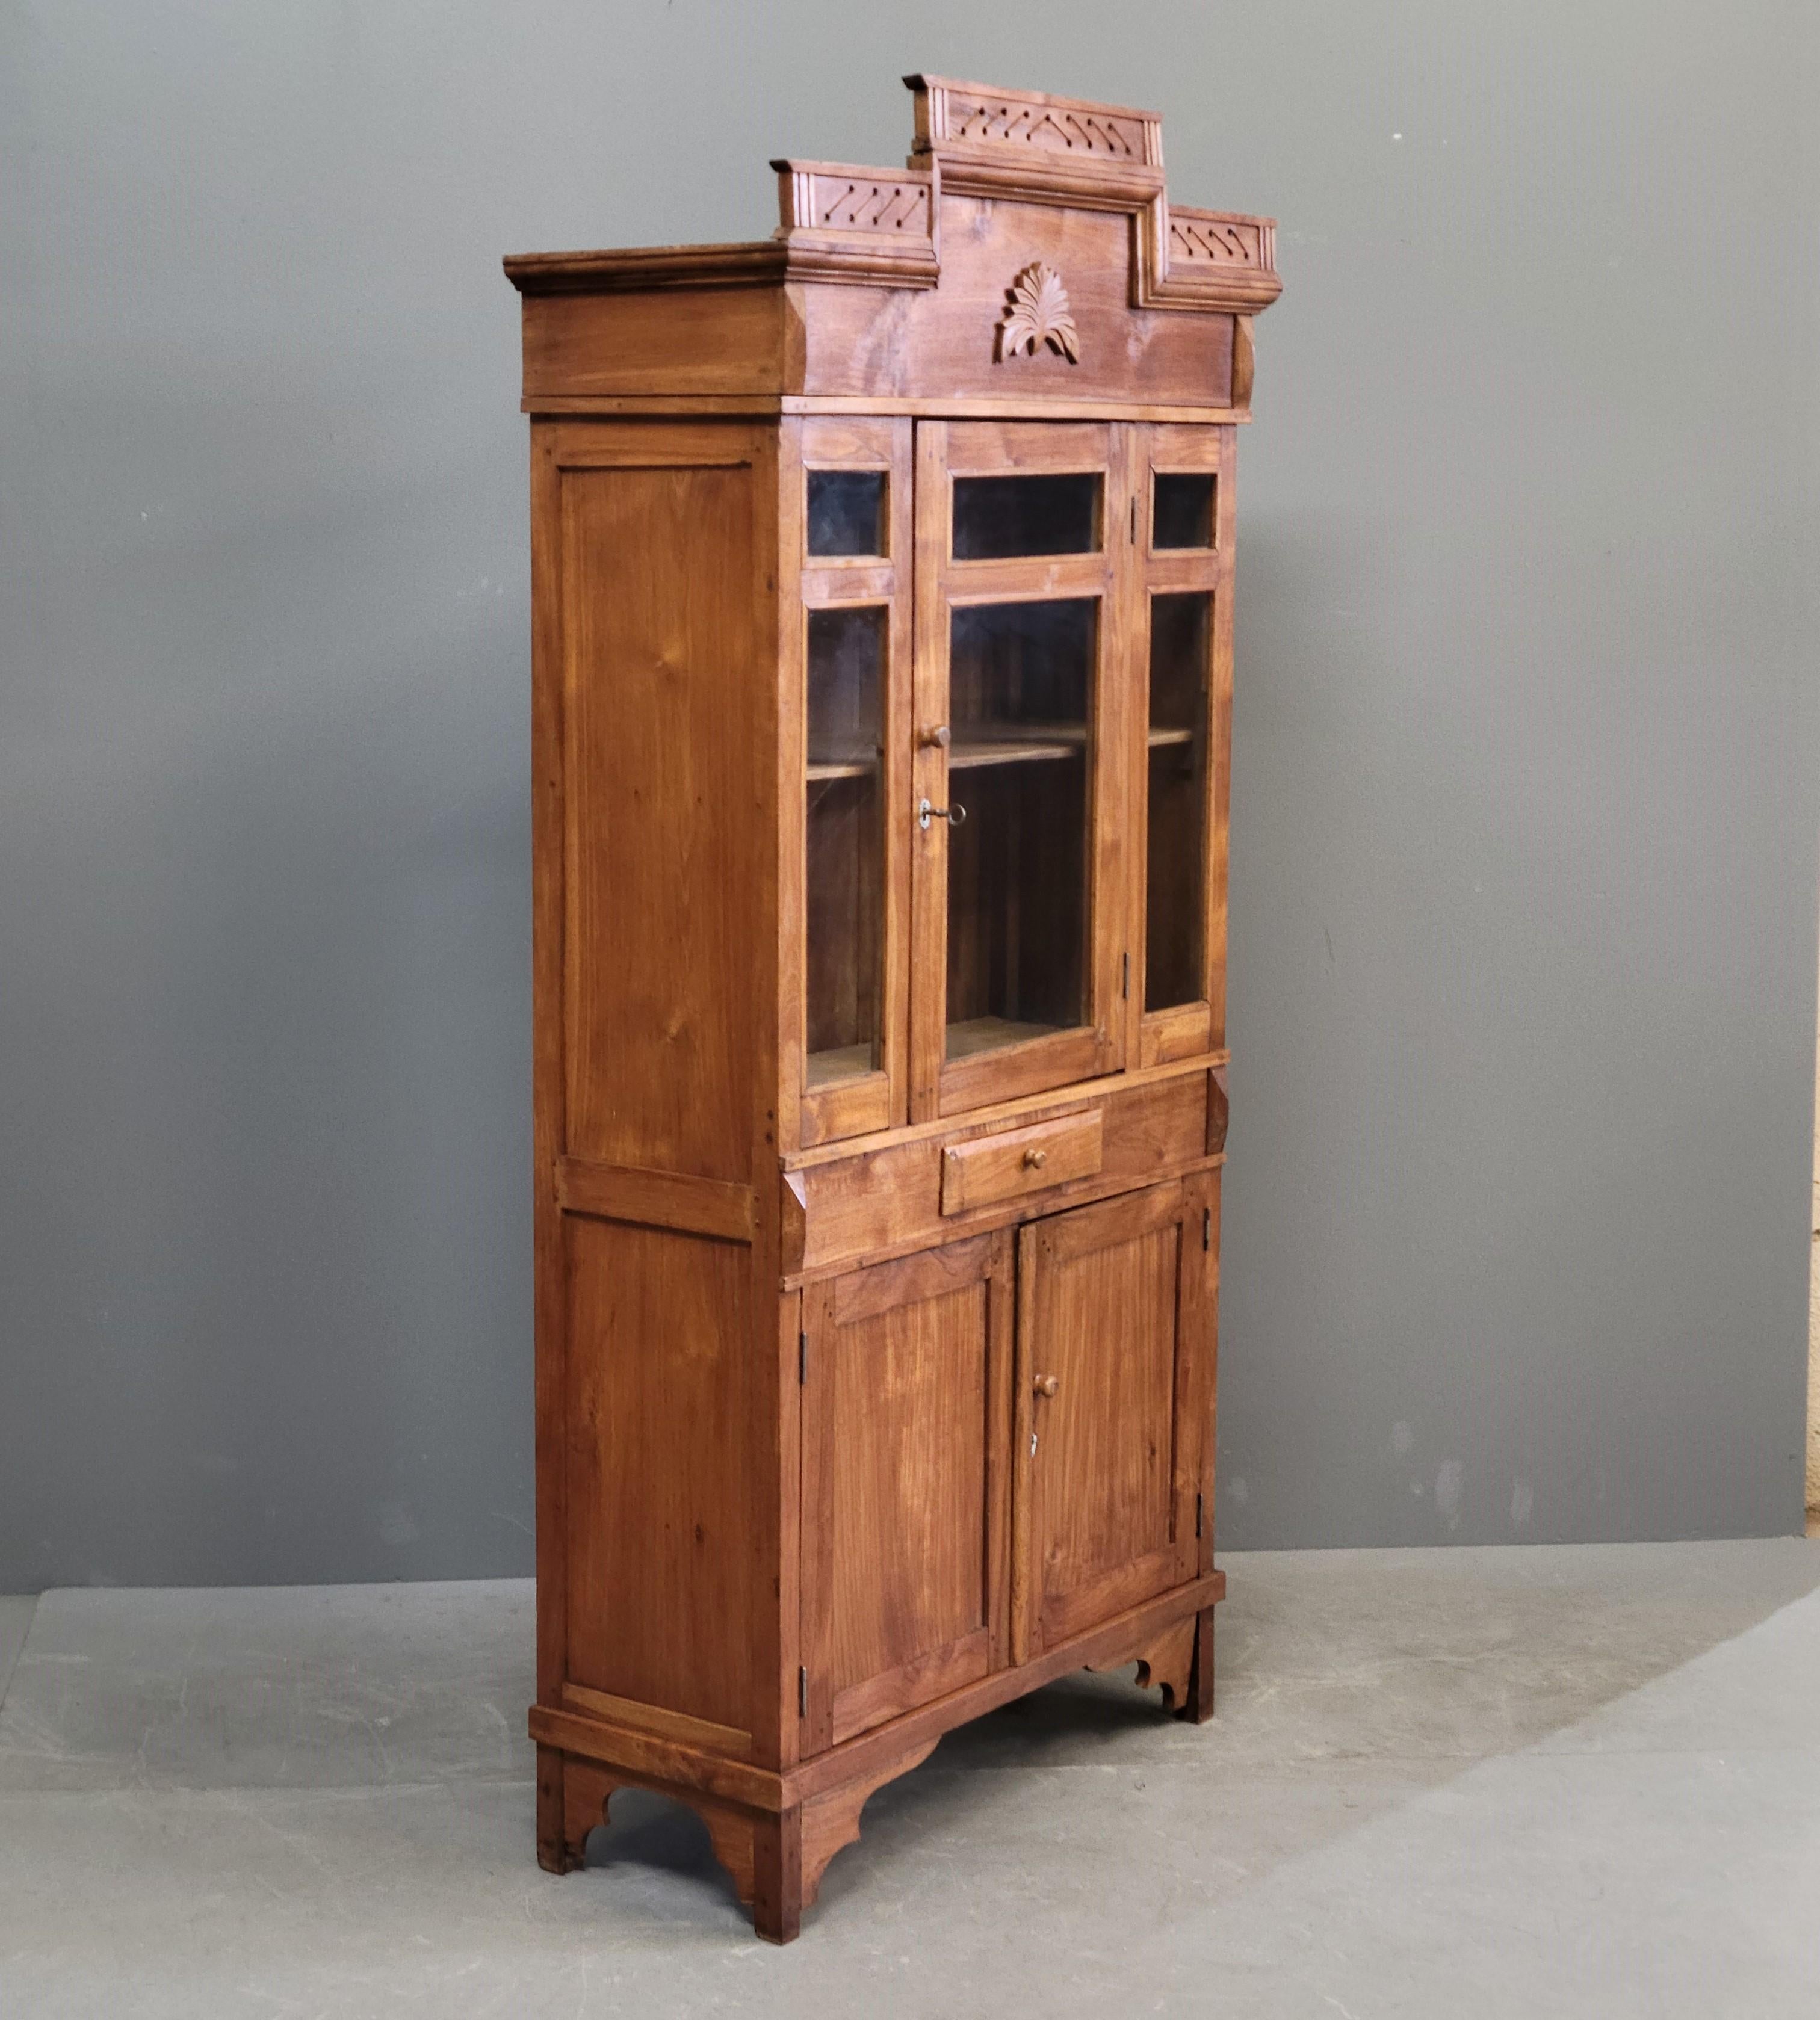 A charming teak Dutch Colonial storage cabinet with glass doors from Java, Indonesia. The stepped crown with applied carving is distinctly Dutch. Ample storage below, storage drawer, and glass door storage above for display space. Imperfections in